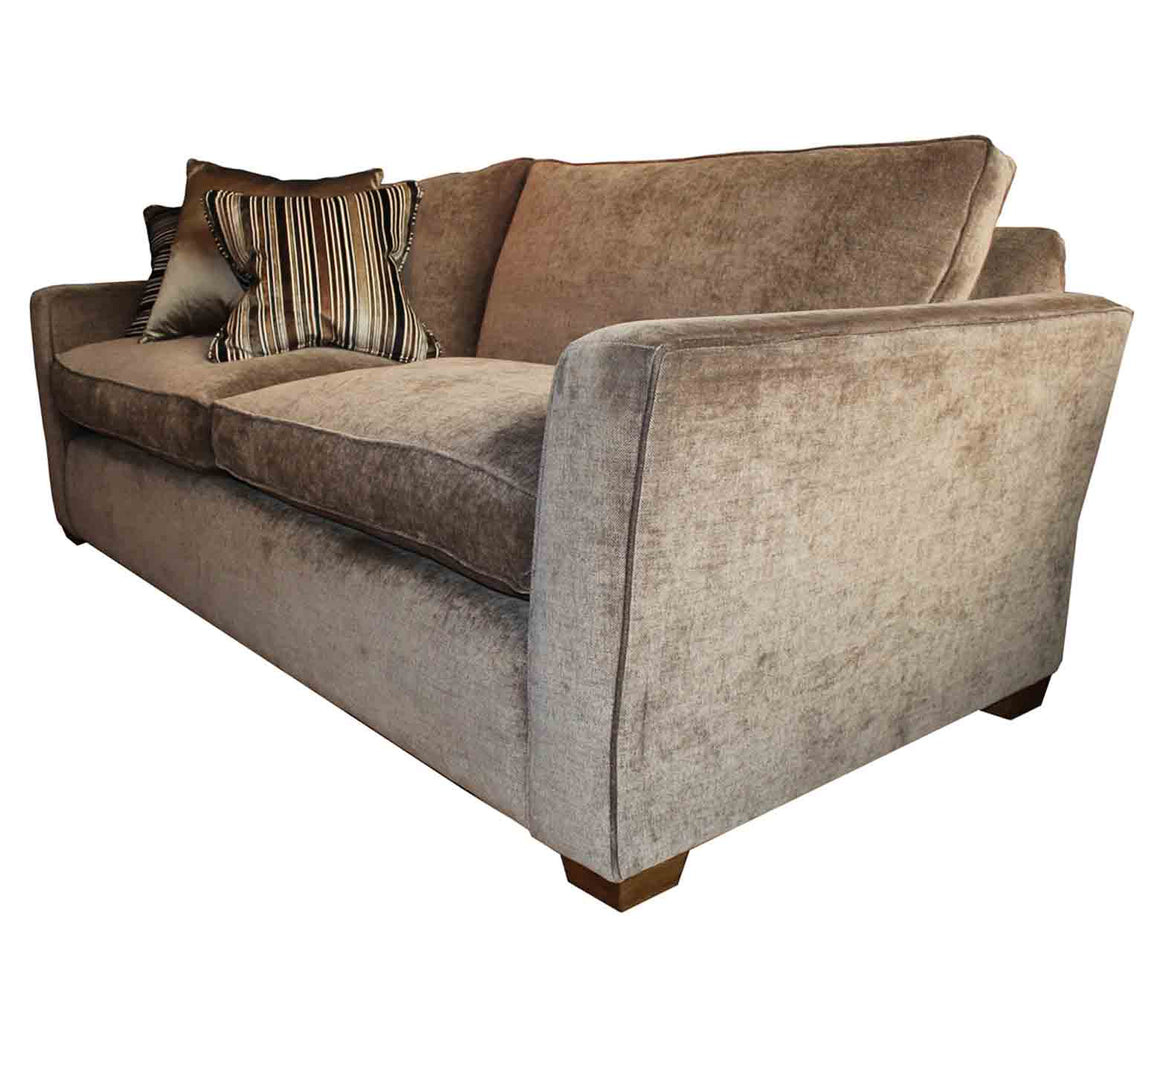 Java sofas and chairs in Warwick ' Lovely' velvet HALF PRICE TO ORDER